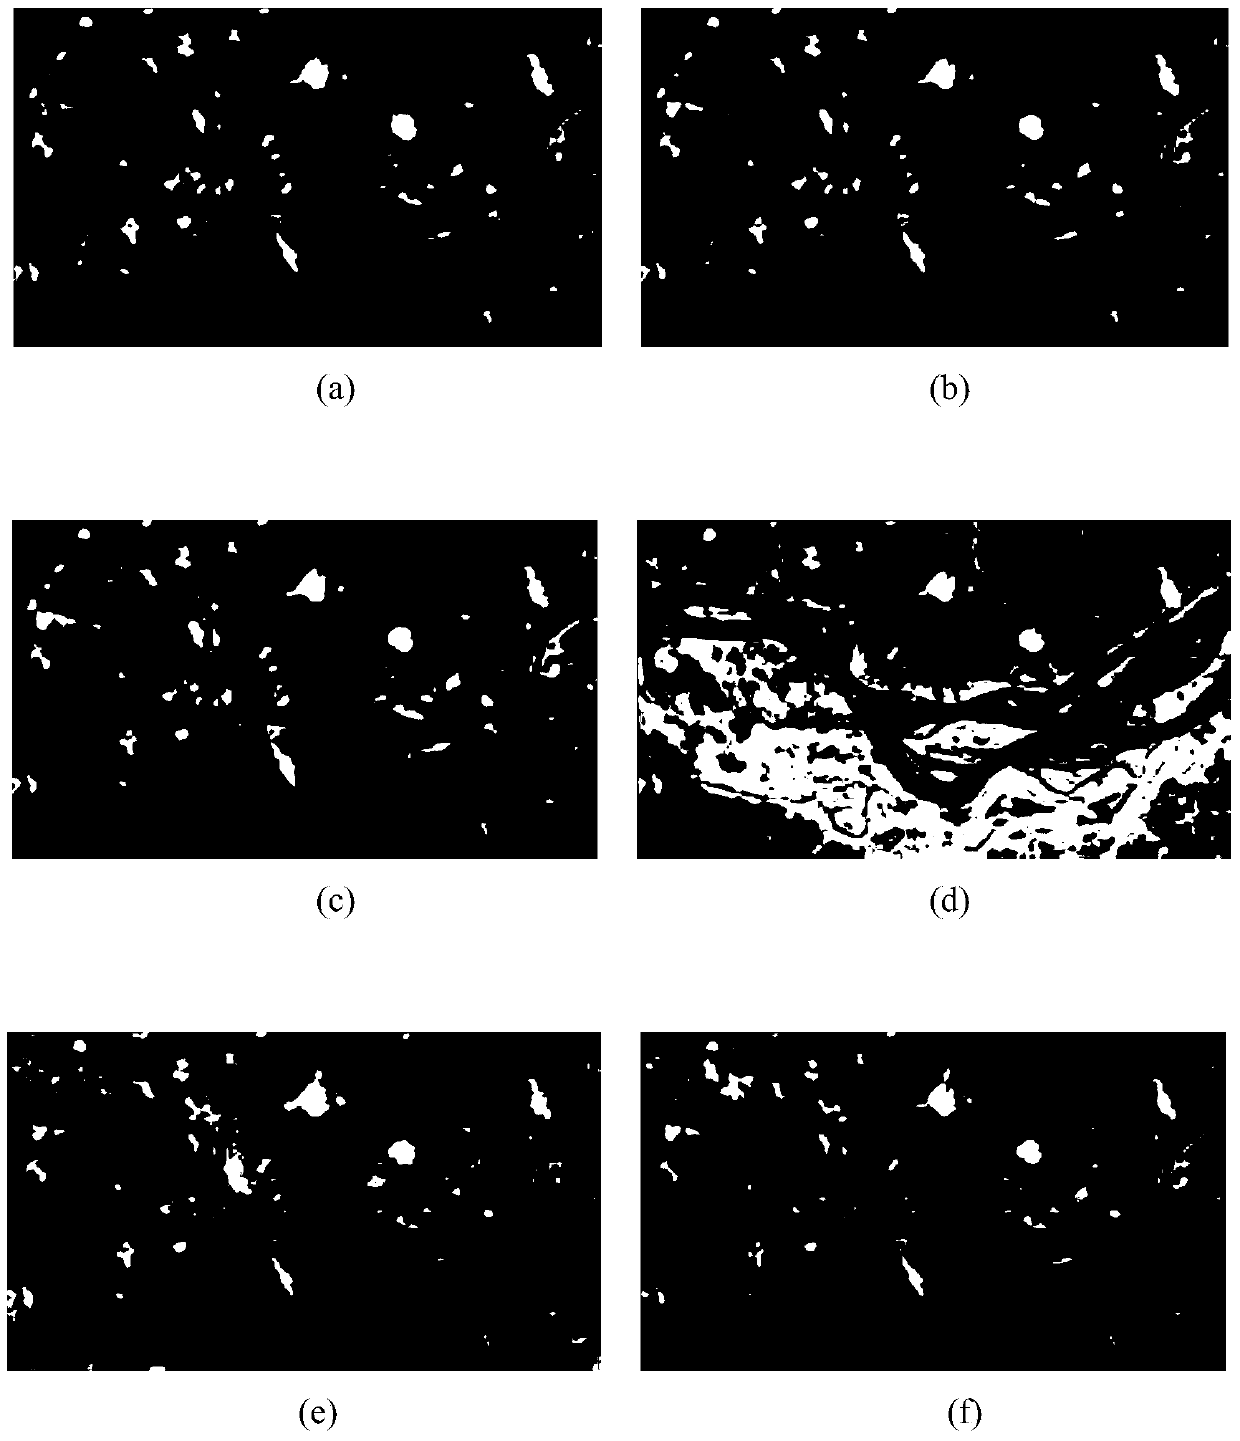 Multispectral image change detection method based on semi-supervised dimensionality reduction and saliency map